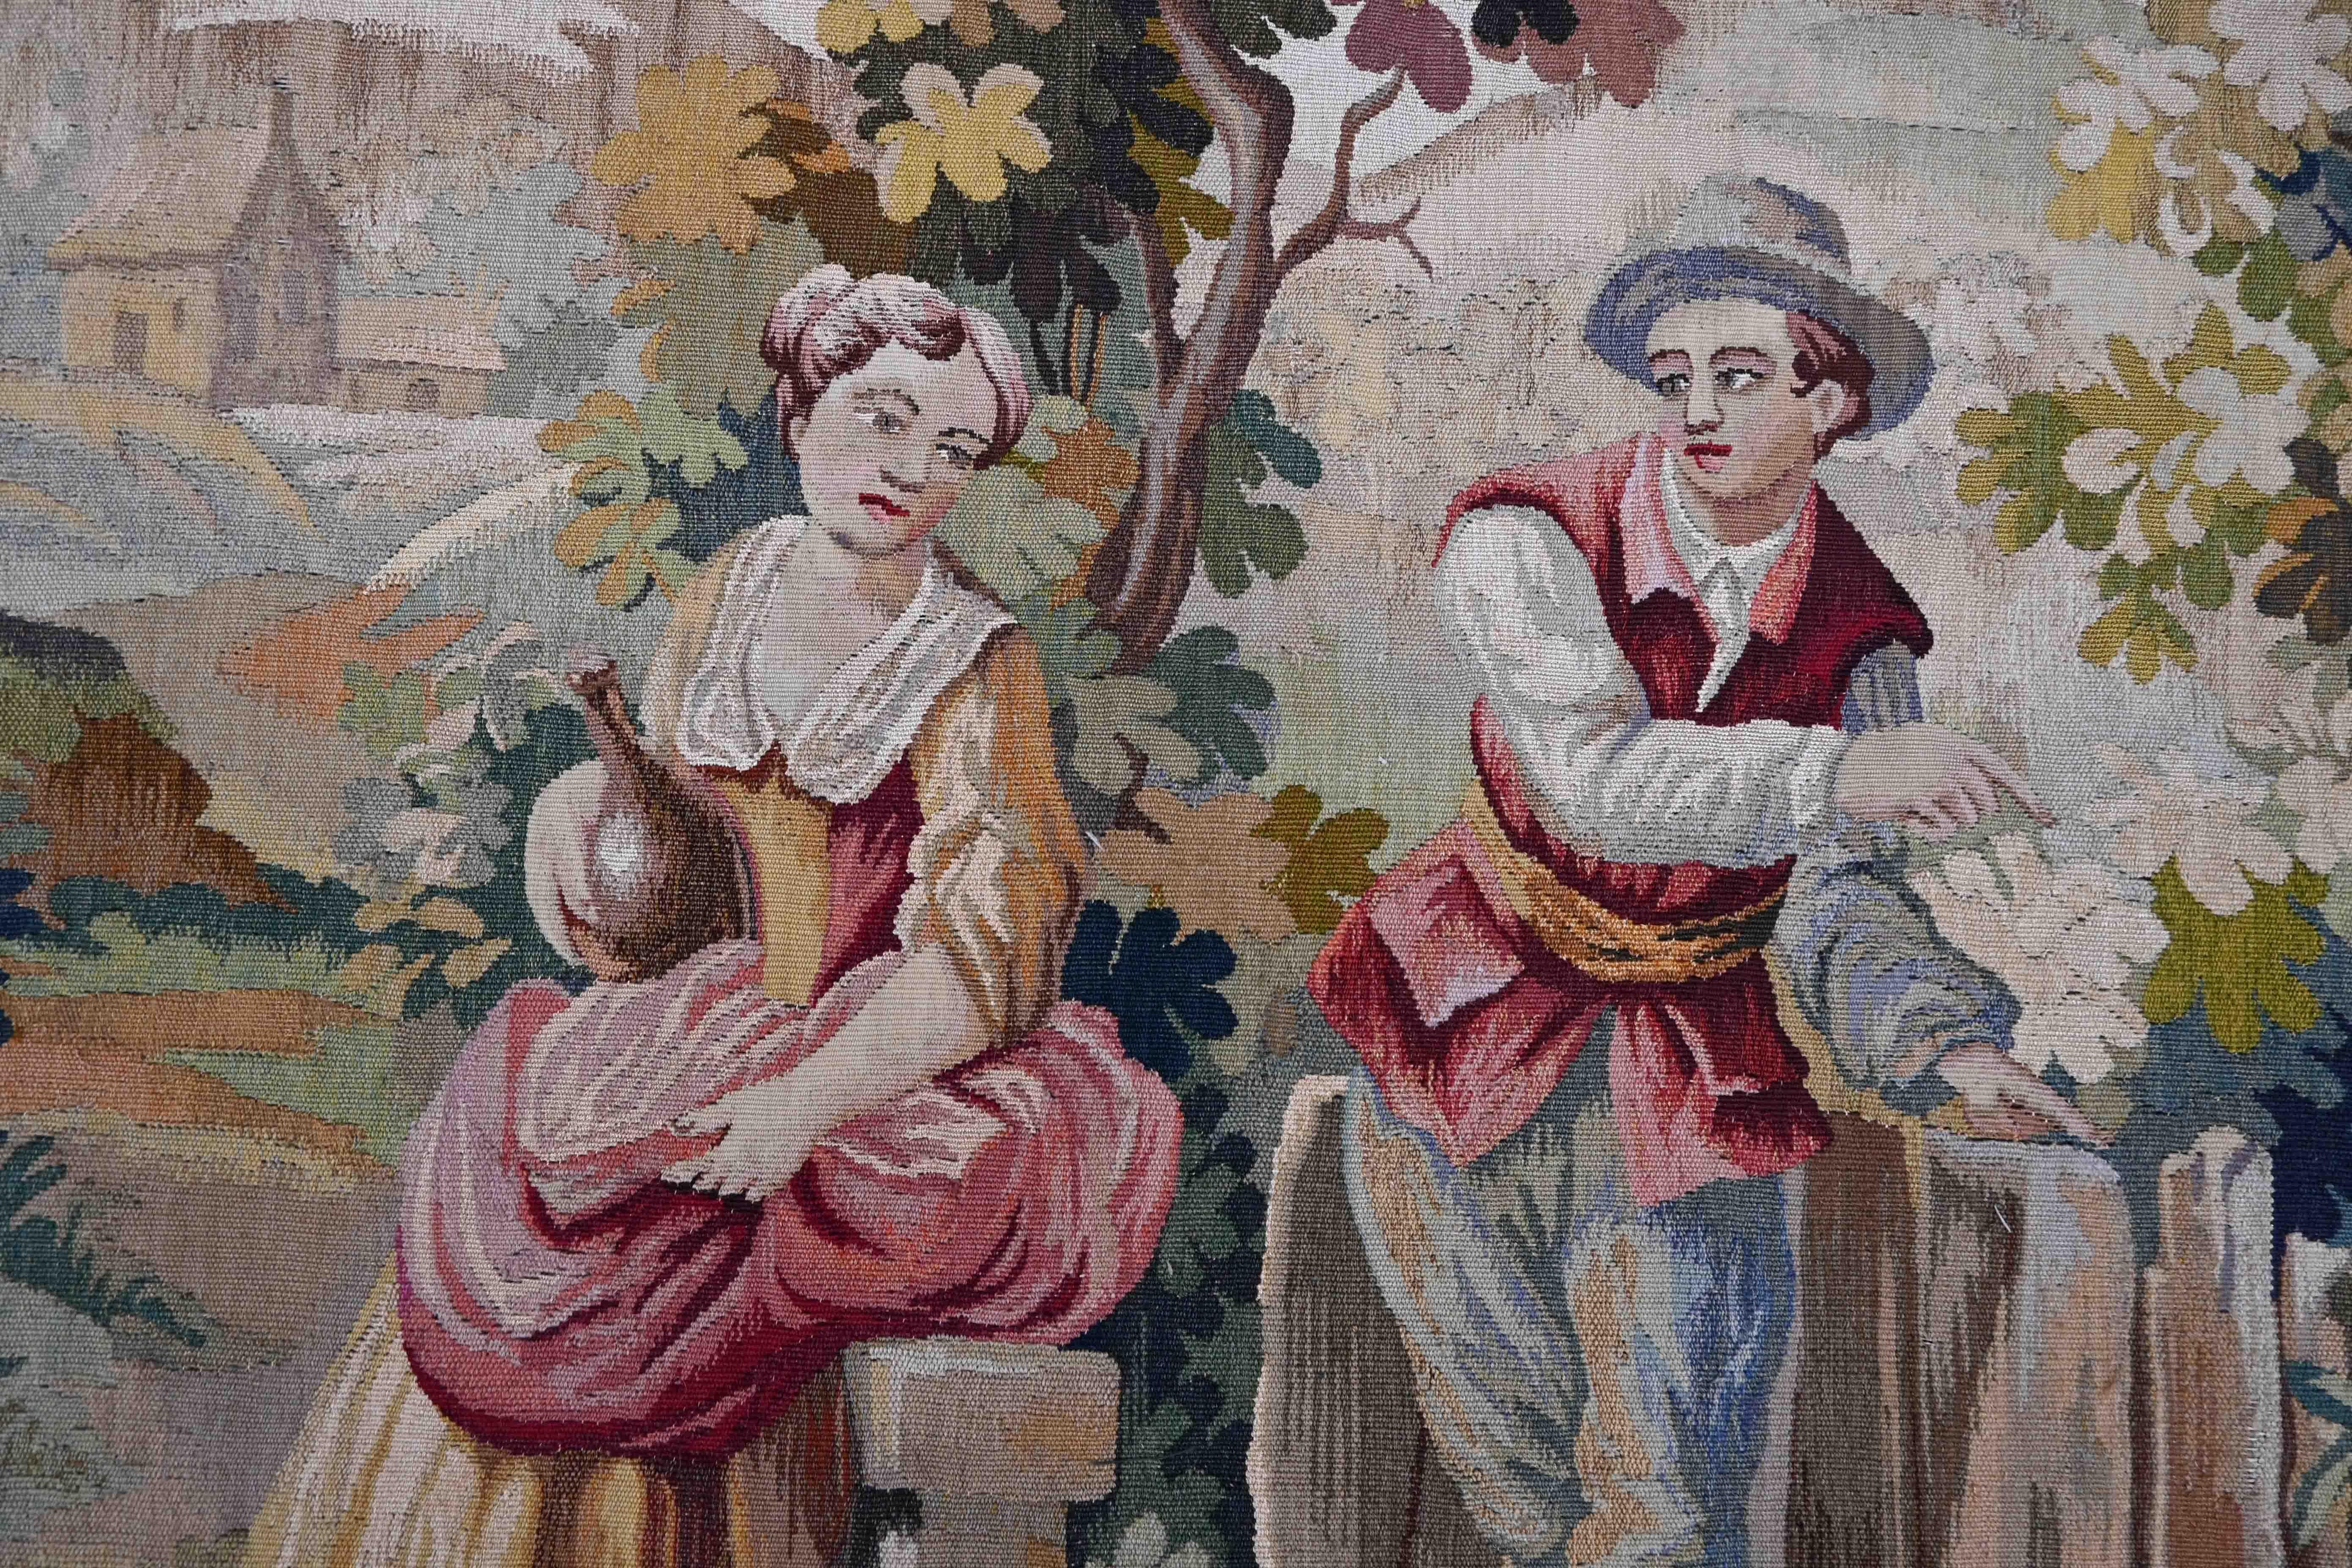 Aubusson tapestry 19th century petanque game scene - N° 1332 For Sale 6